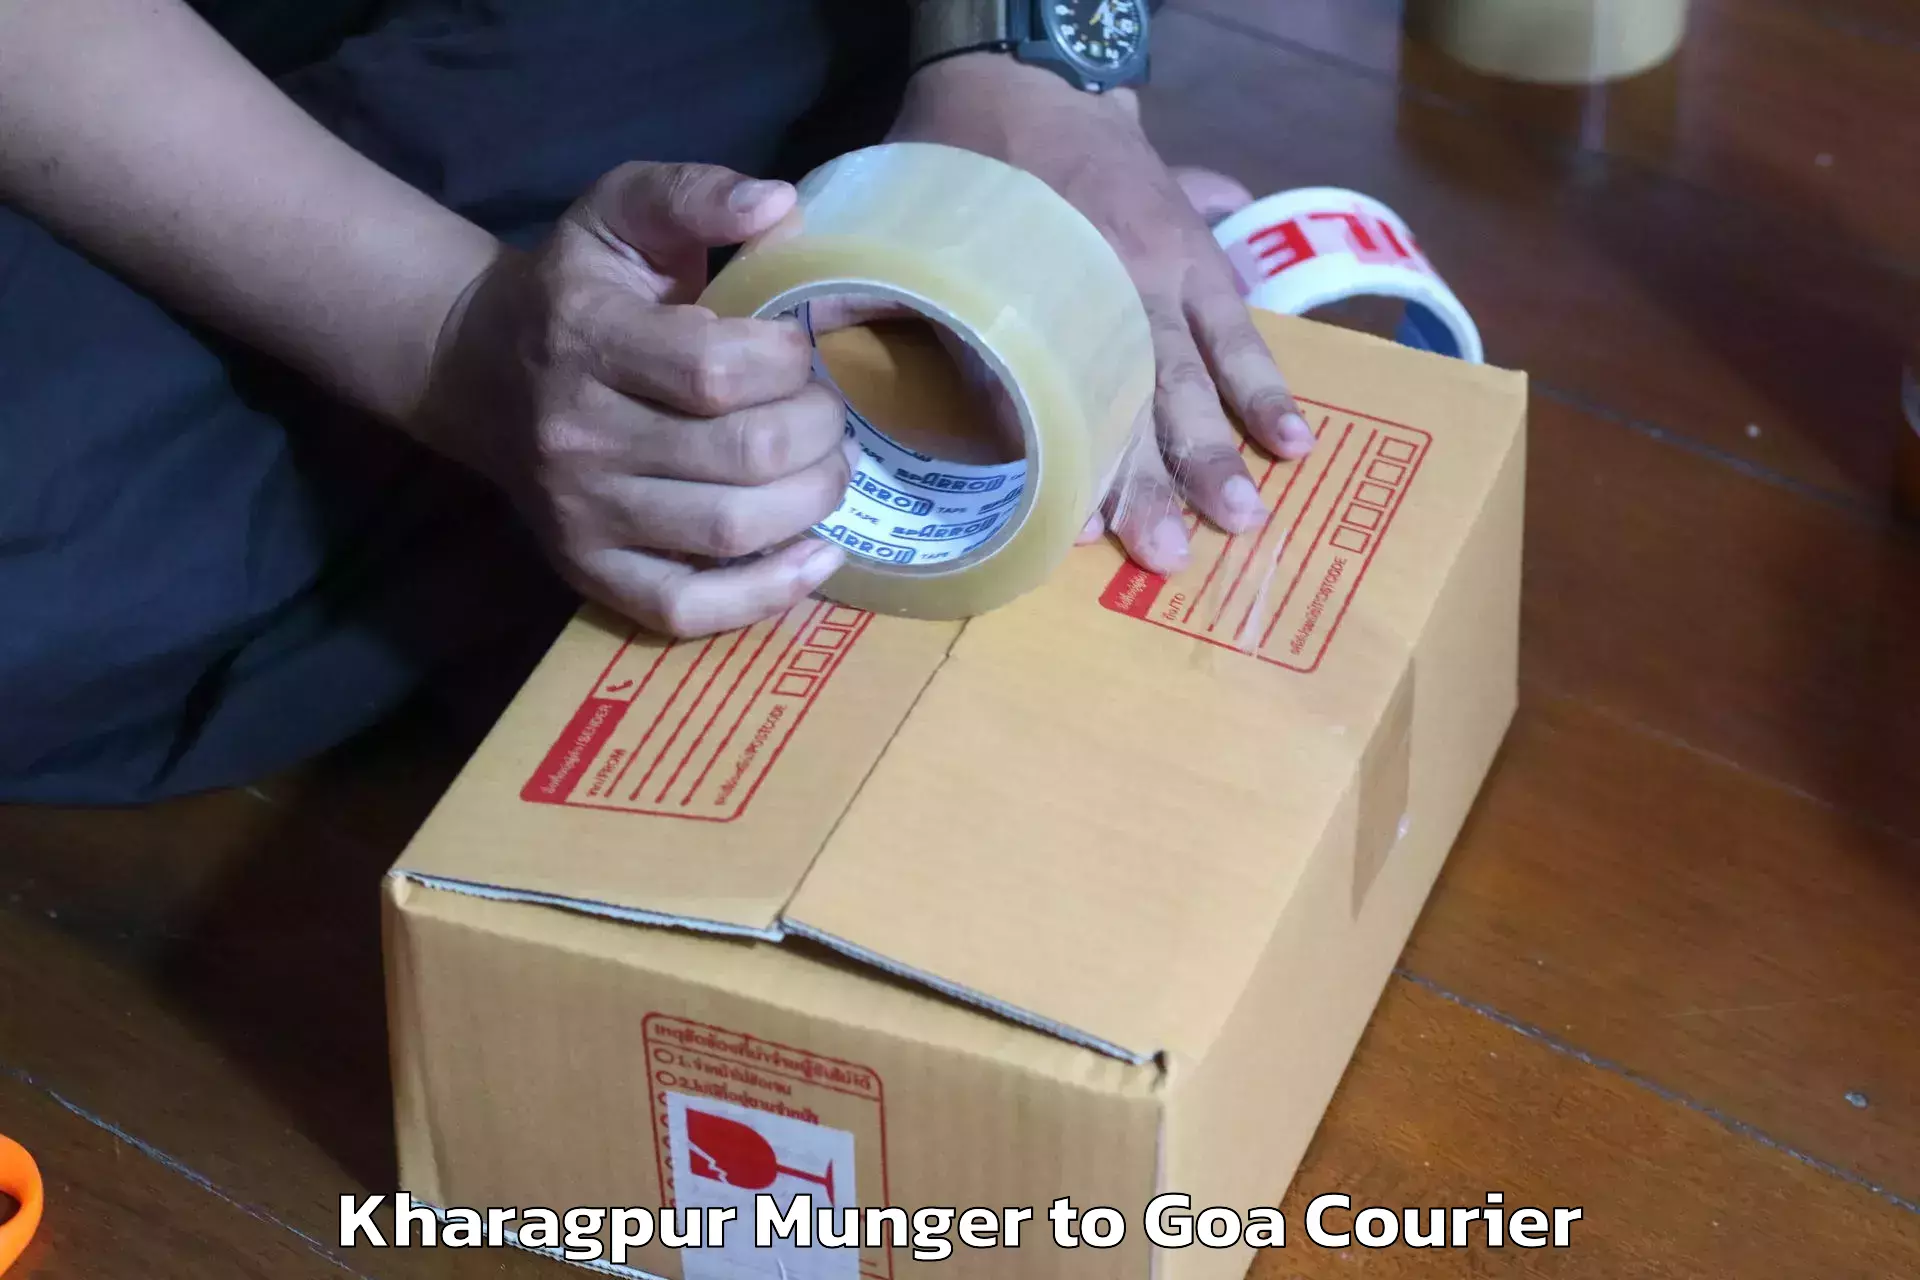 Home moving specialists Kharagpur Munger to Goa University